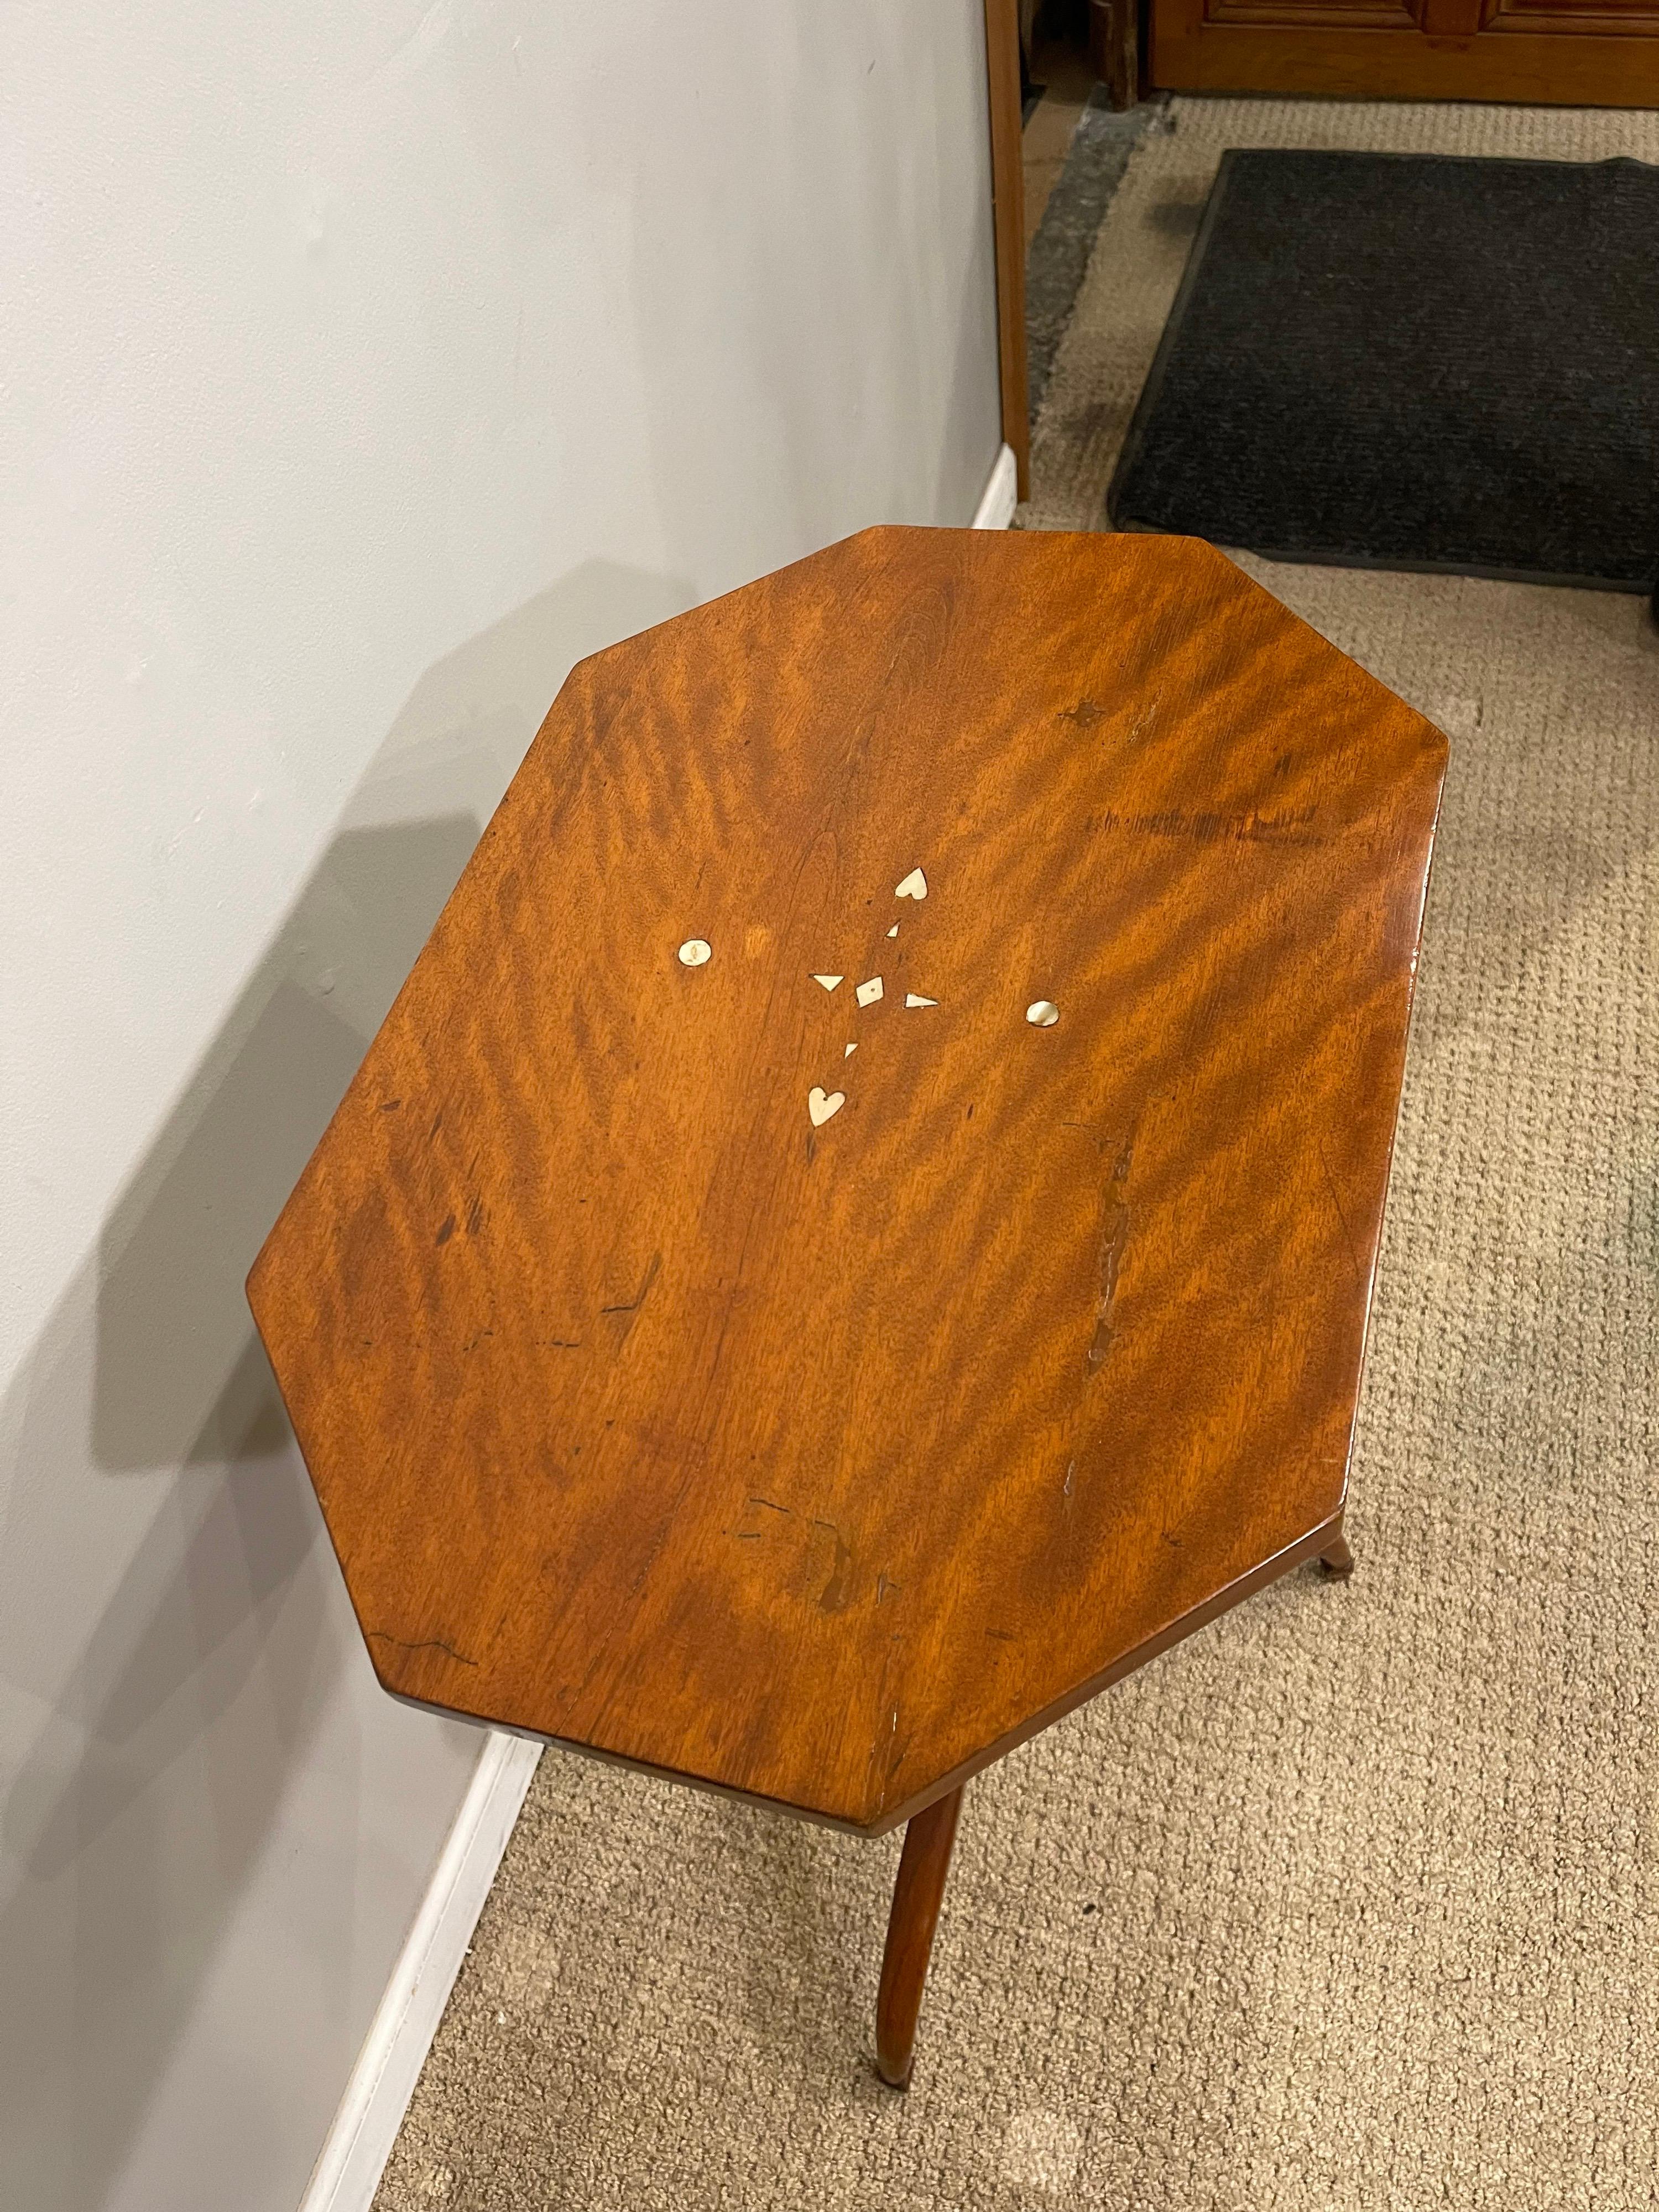 Federal Tiger Maple Tripod Table, American, Early 19th Century For Sale 5